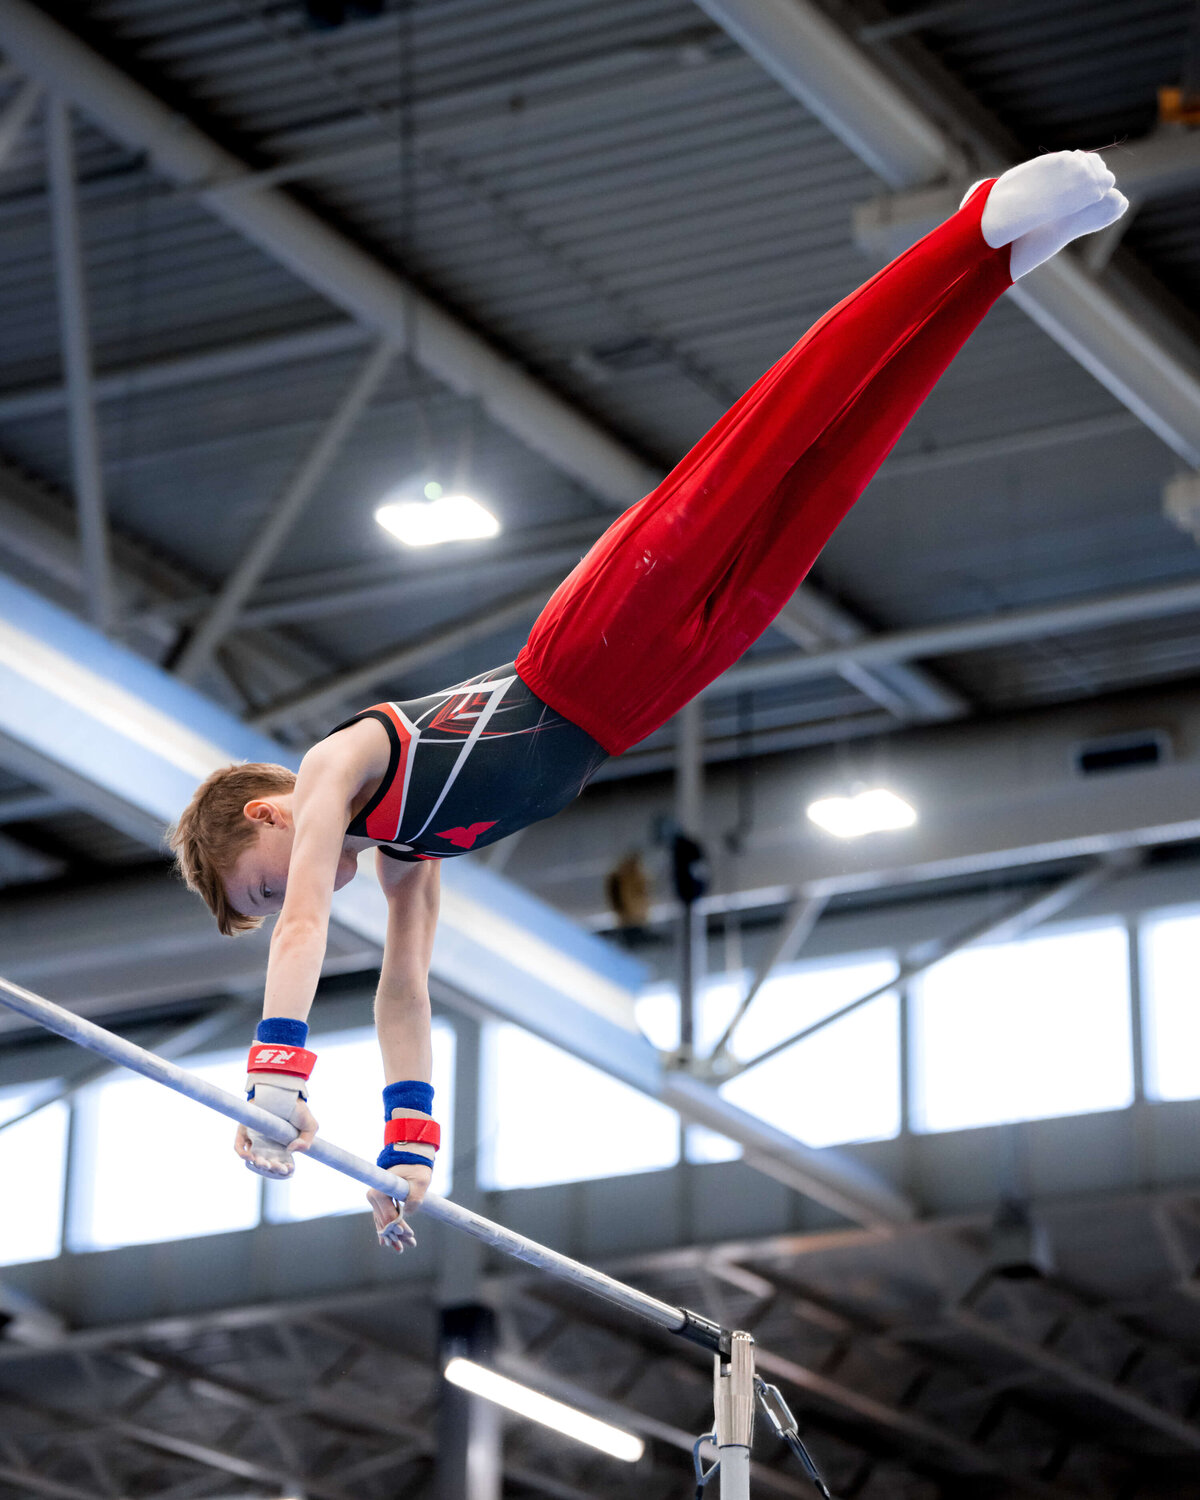 Photo by Luke O'Geil taken at the 2023 inaugural Grizzly Classic men's artistic gymnastics competitionA1_08978